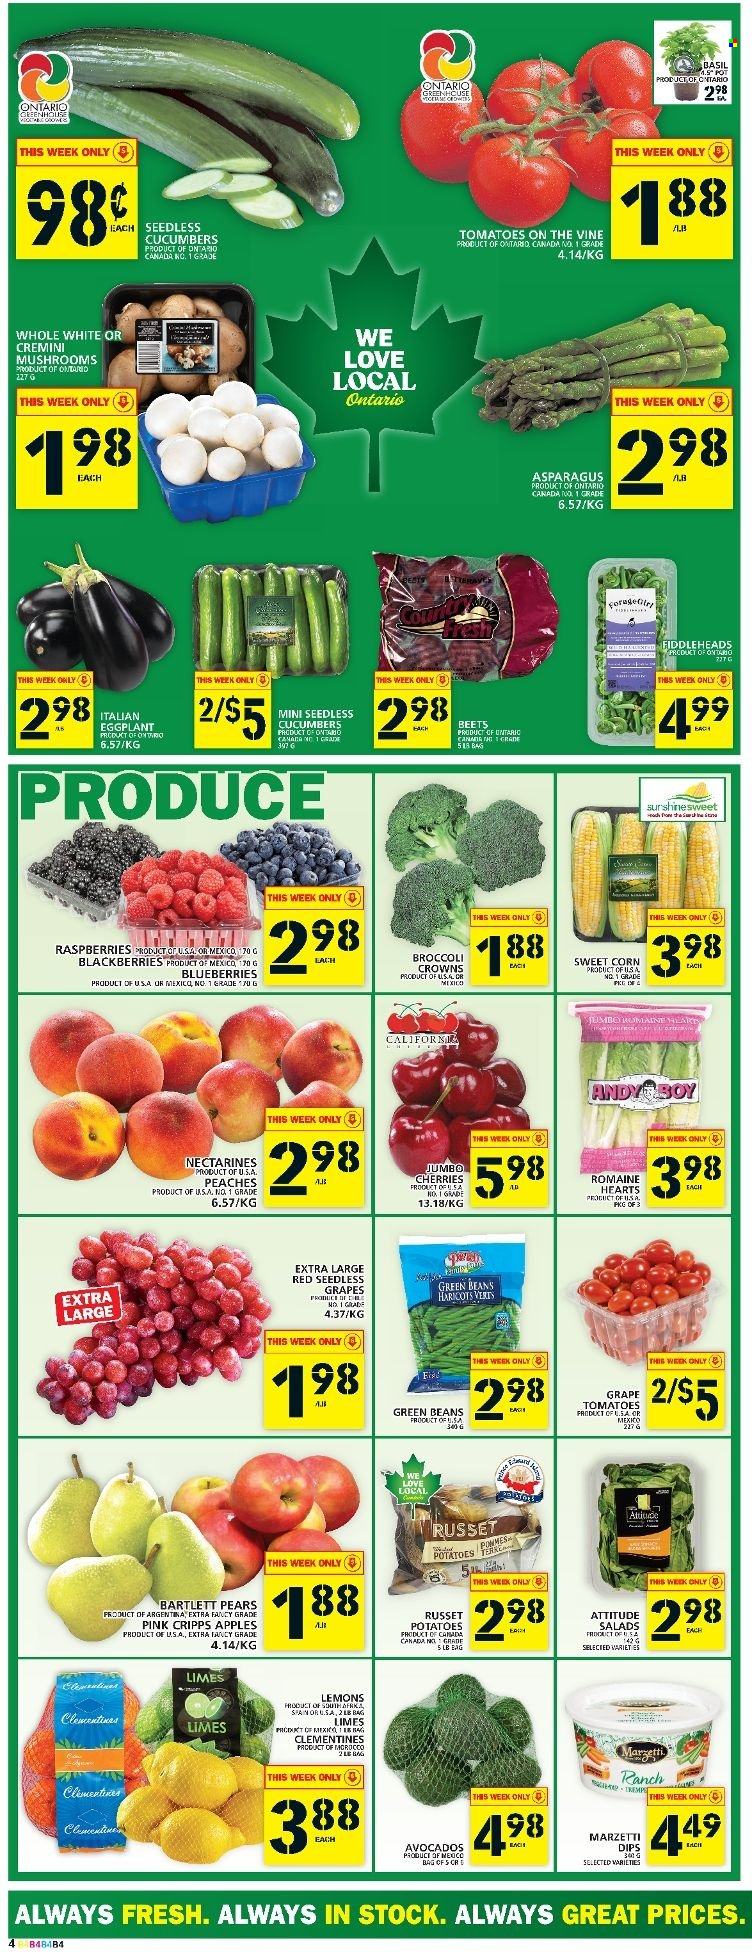 thumbnail - Food Basics Flyer - May 19, 2022 - May 25, 2022 - Sales products - asparagus, beans, broccoli, corn, cucumber, green beans, russet potatoes, tomatoes, potatoes, eggplant, sweet corn, apples, avocado, Bartlett pears, blackberries, blueberries, clementines, limes, nectarines, seedless grapes, cherries, pears, lemons, peaches, esponja. Page 5.